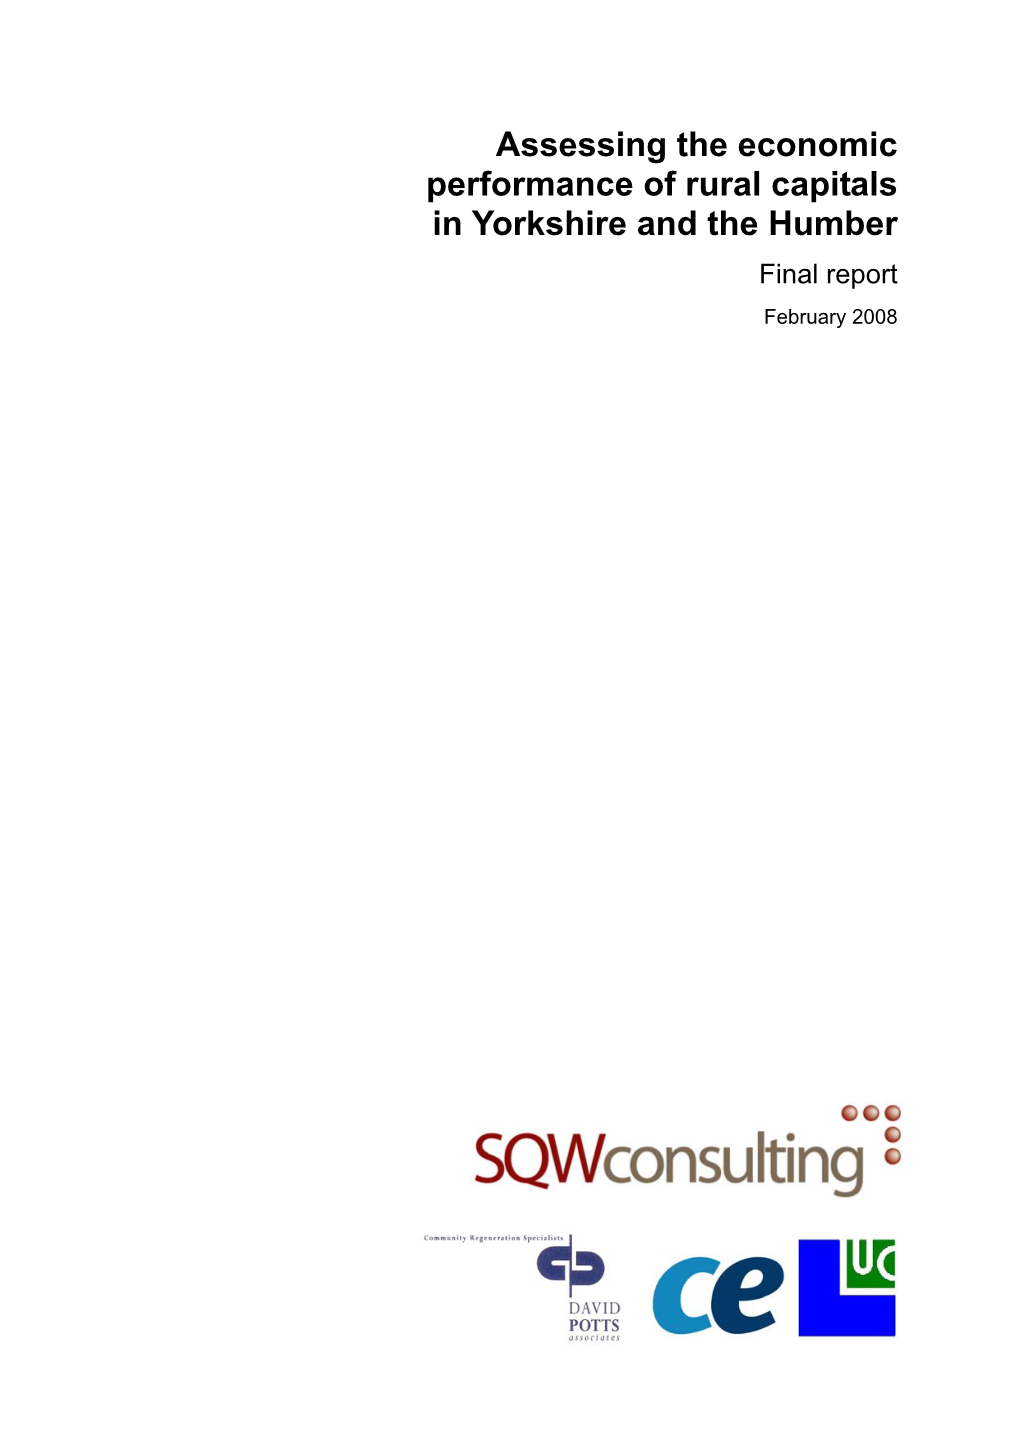 Assessing the Economic Performance of Rural Capitals in Yorkshire and the Humber Final Report February 2008